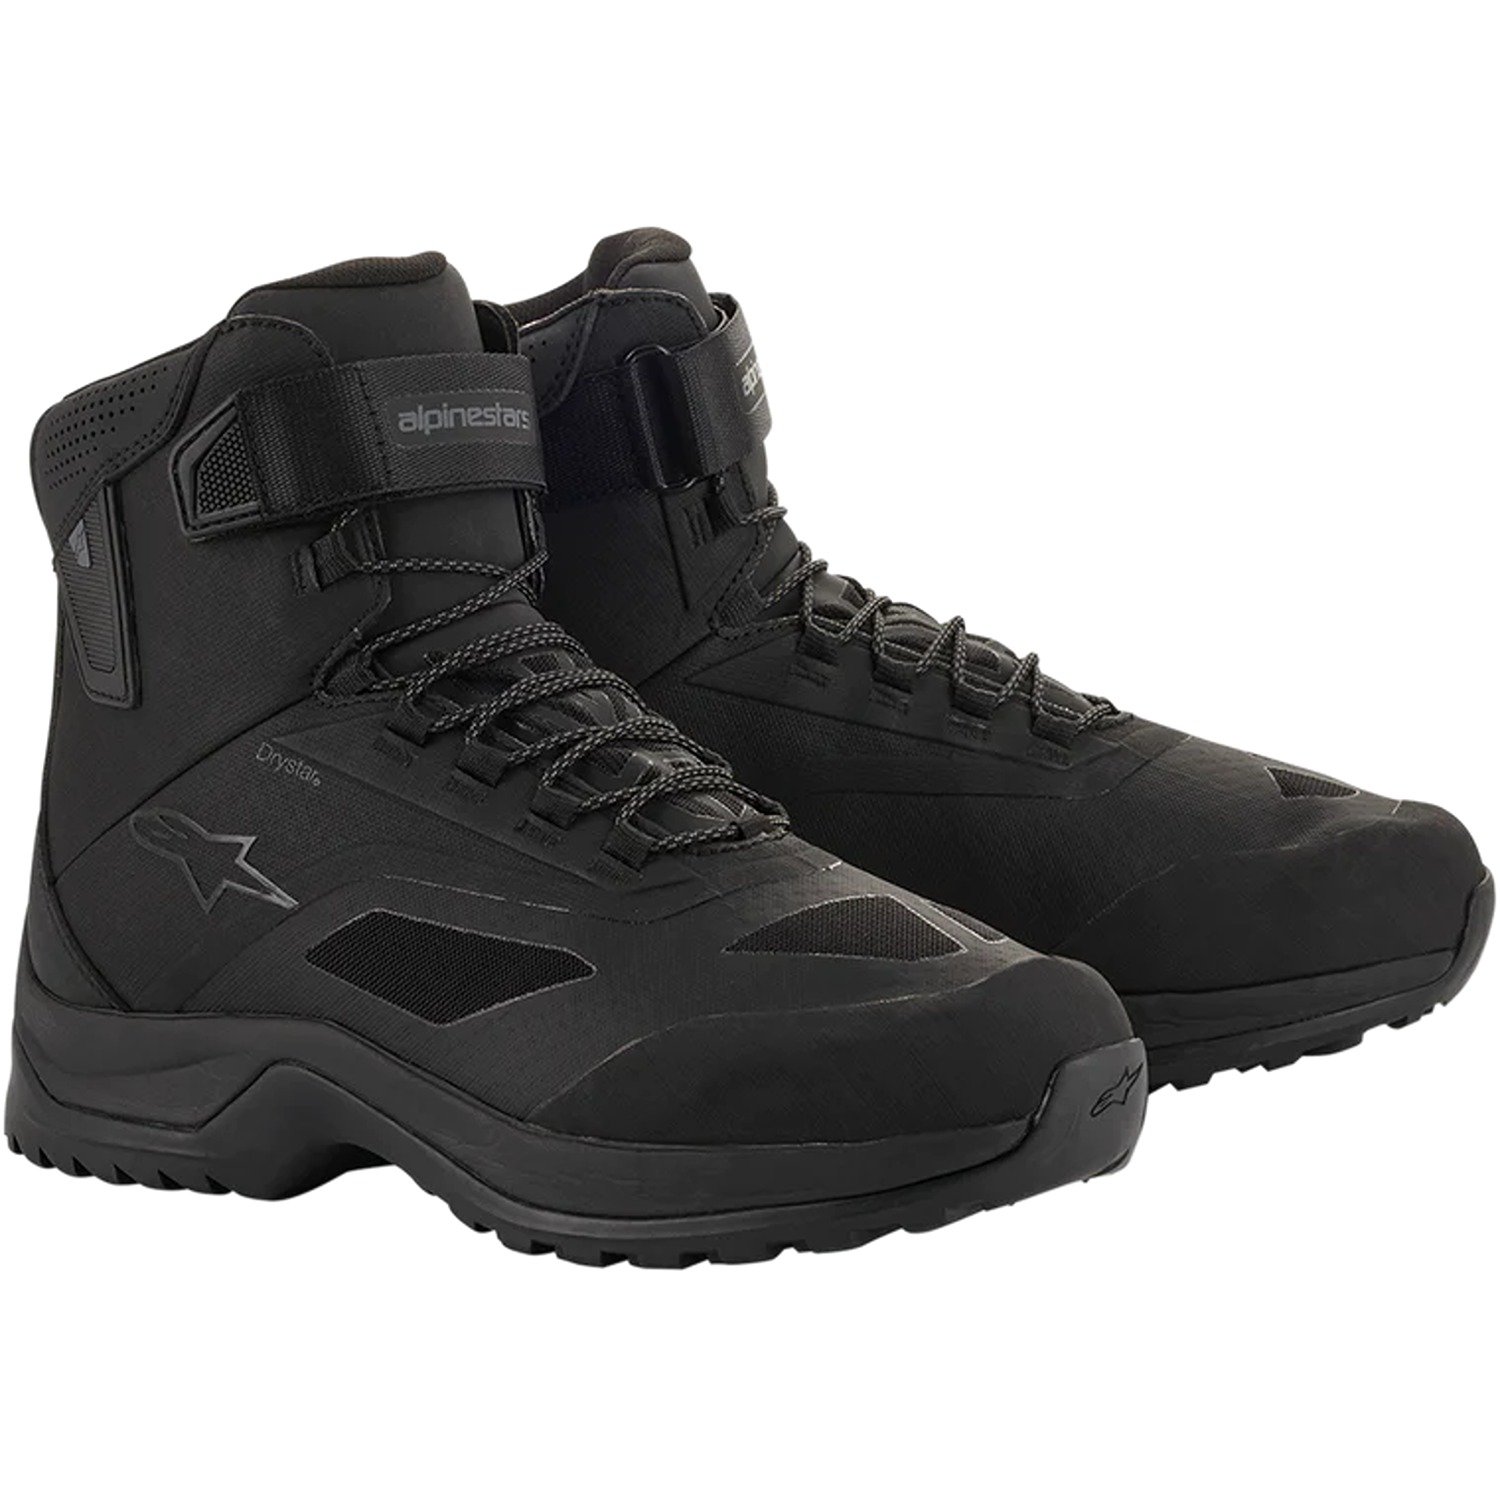 Image of Alpinestars CR-6 Drystar Riding Shoes Black Taille US 11